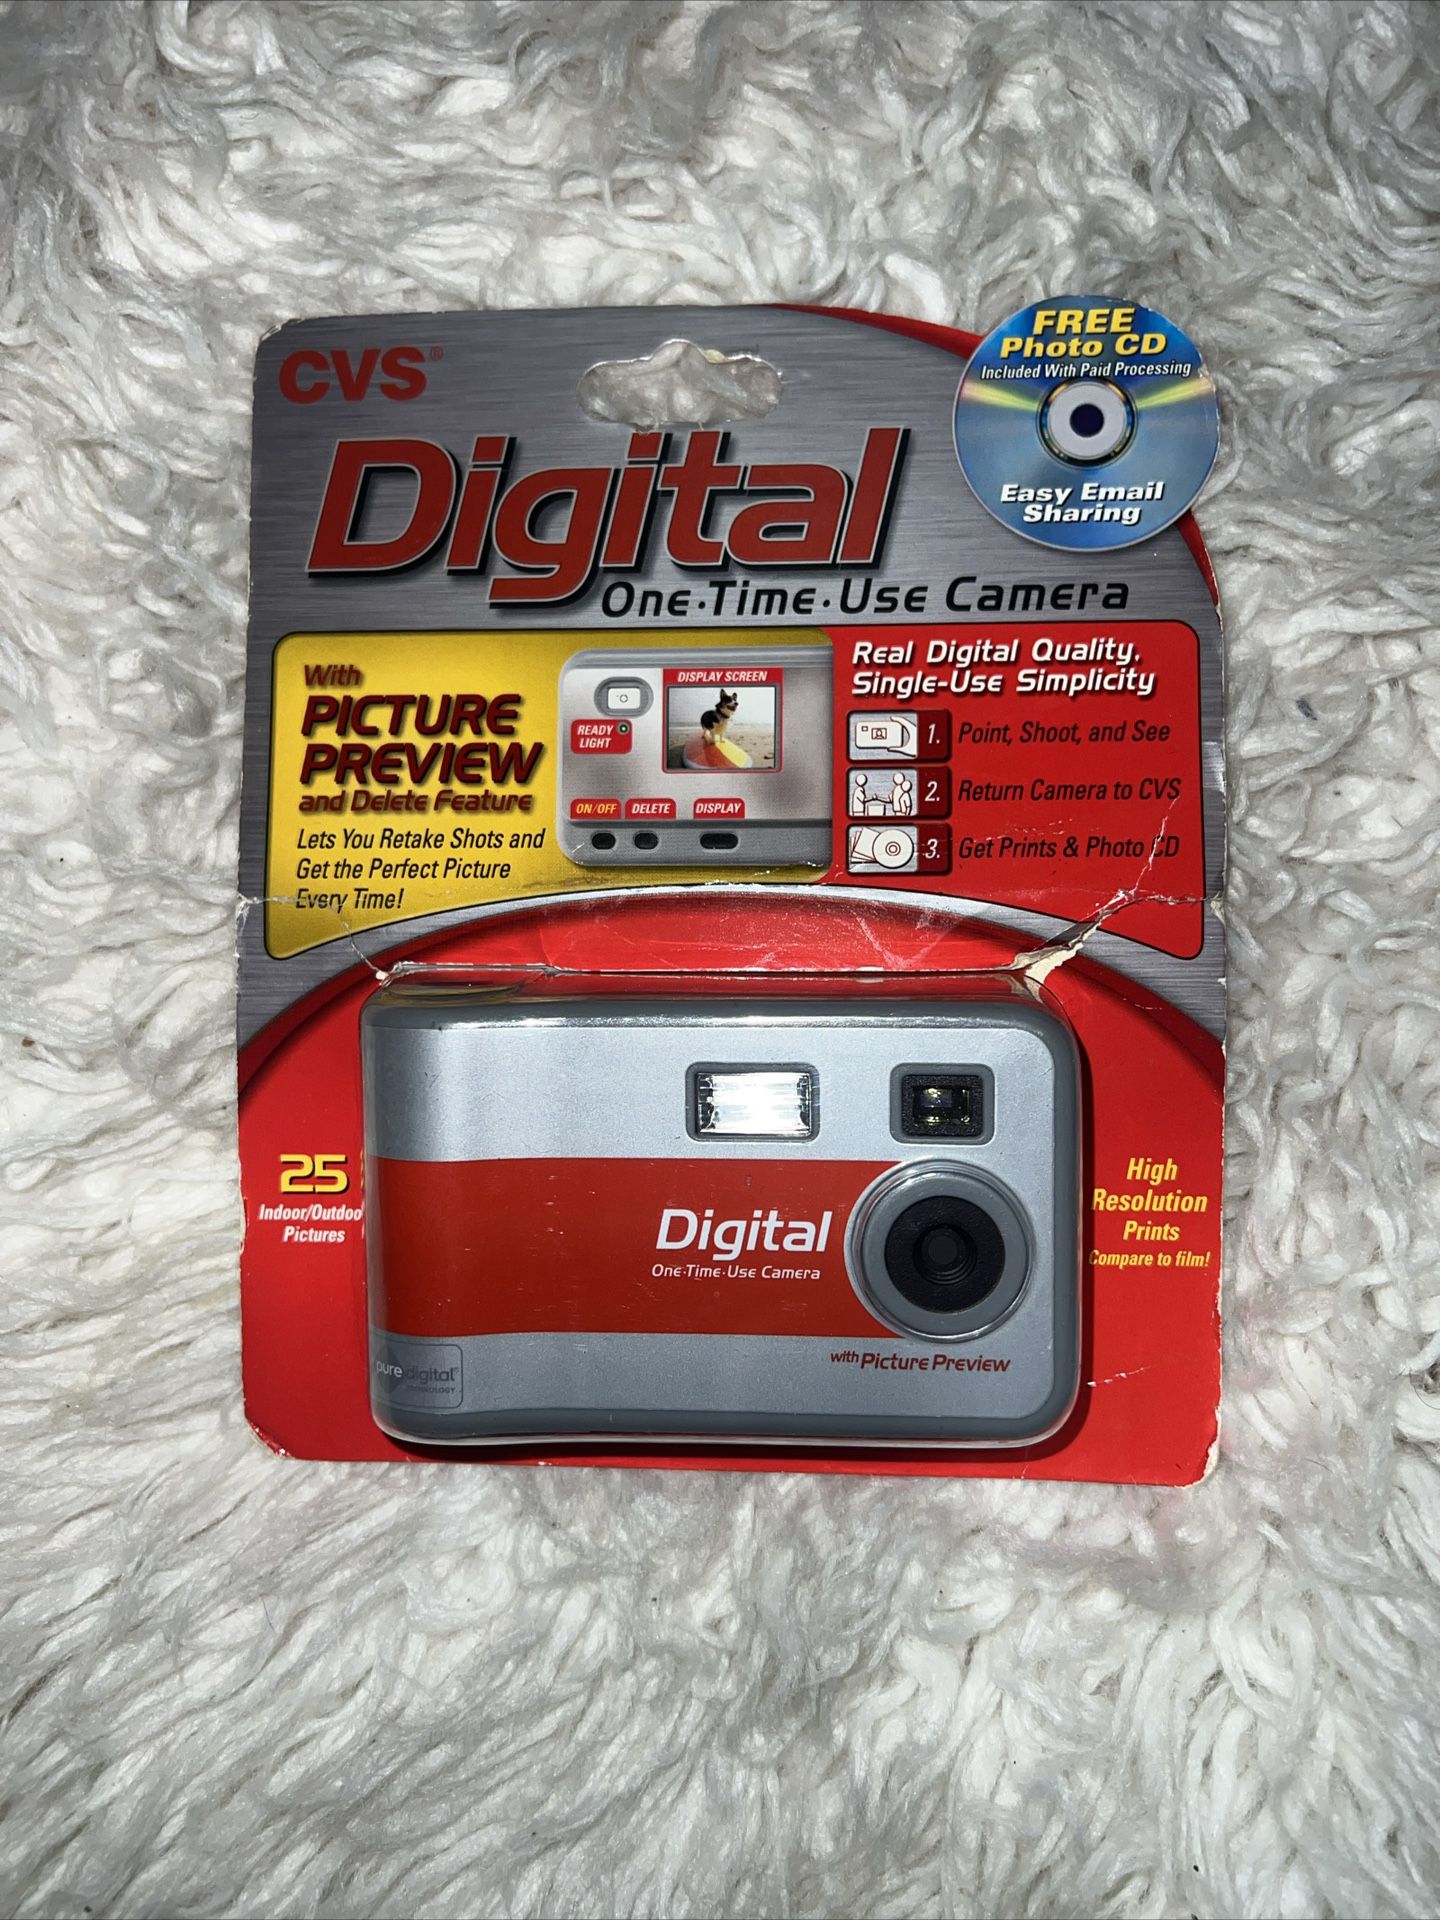 CVS One Time Use Digital Camera 25 Indoor / Outdoor Pictures High Resolution NEW